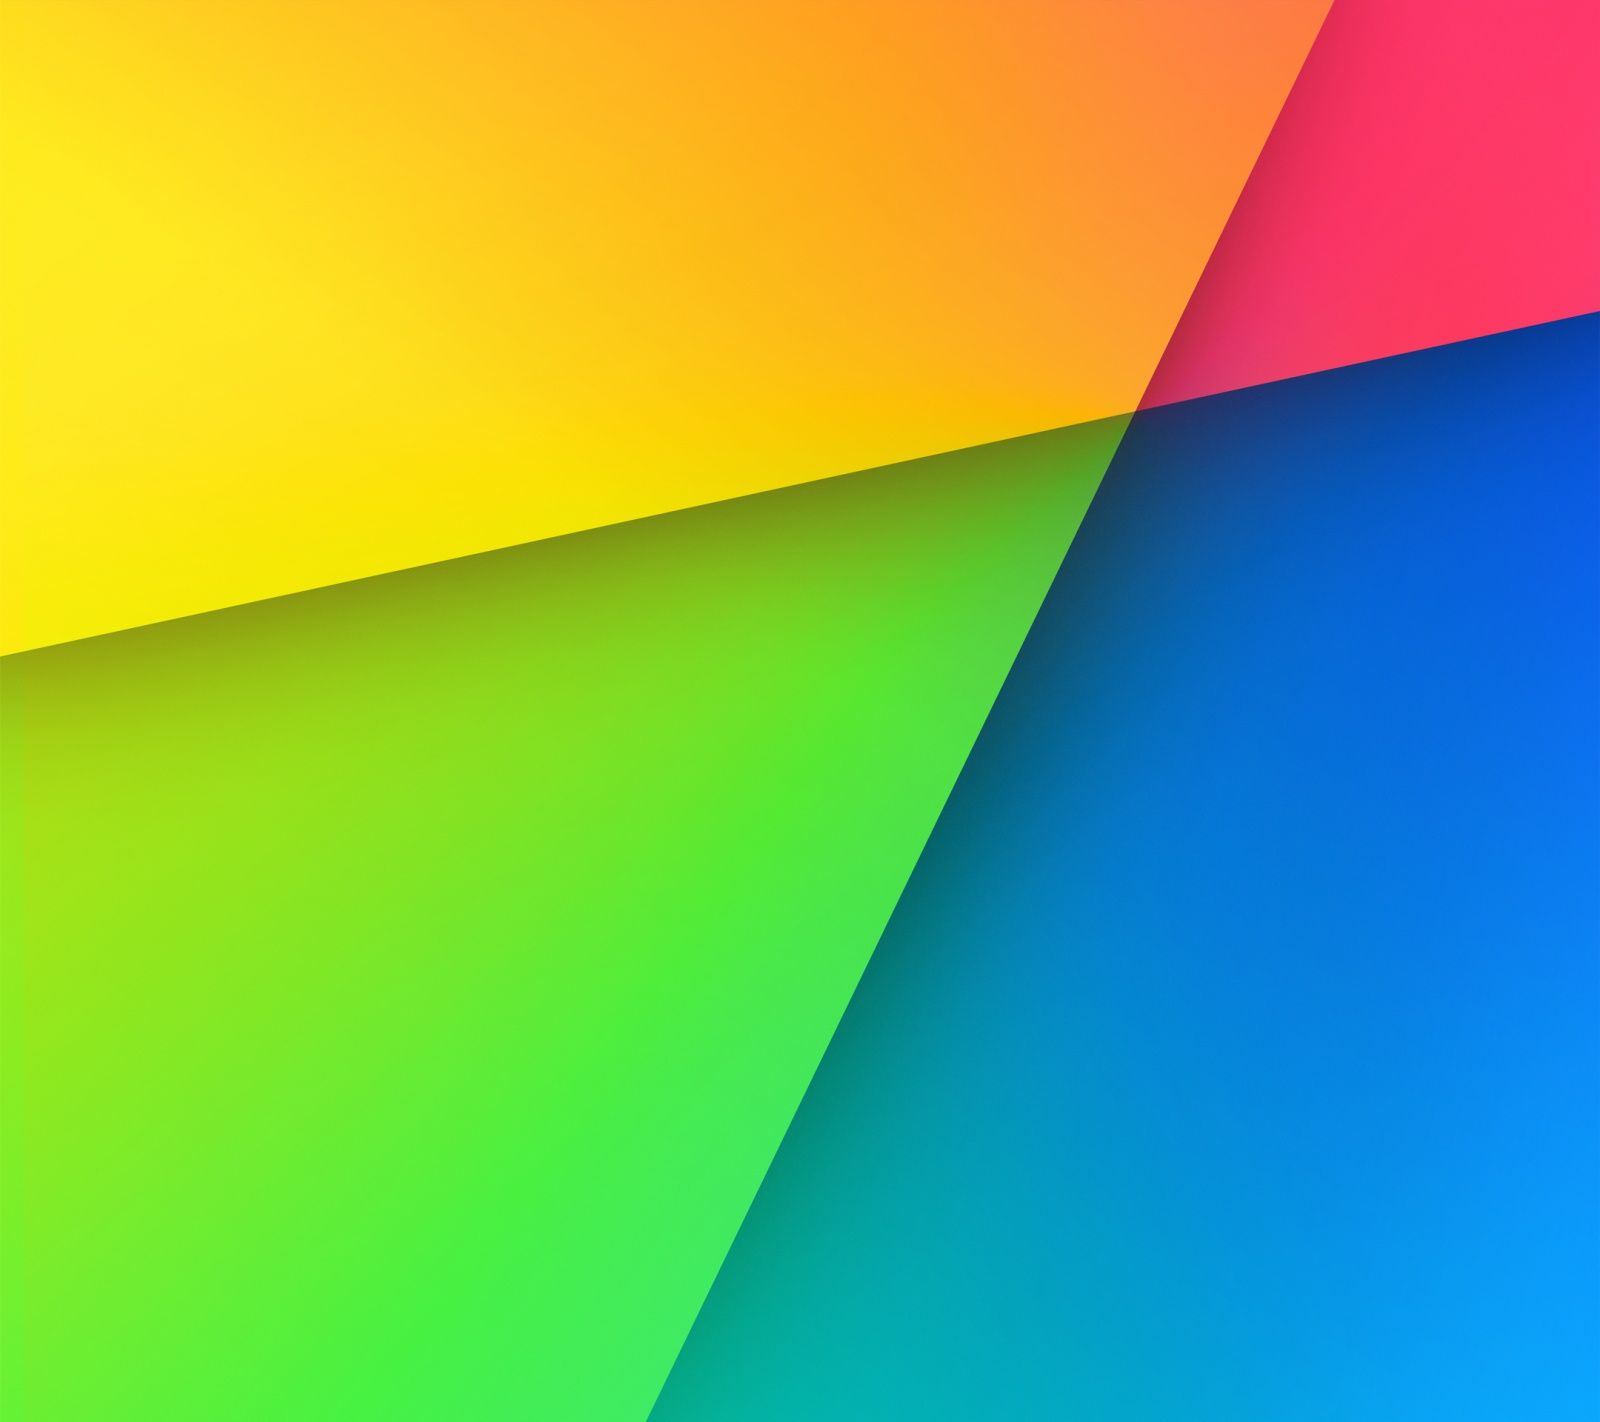 Cult of Android - Download The New Android 4.3 Wallpaper For Your